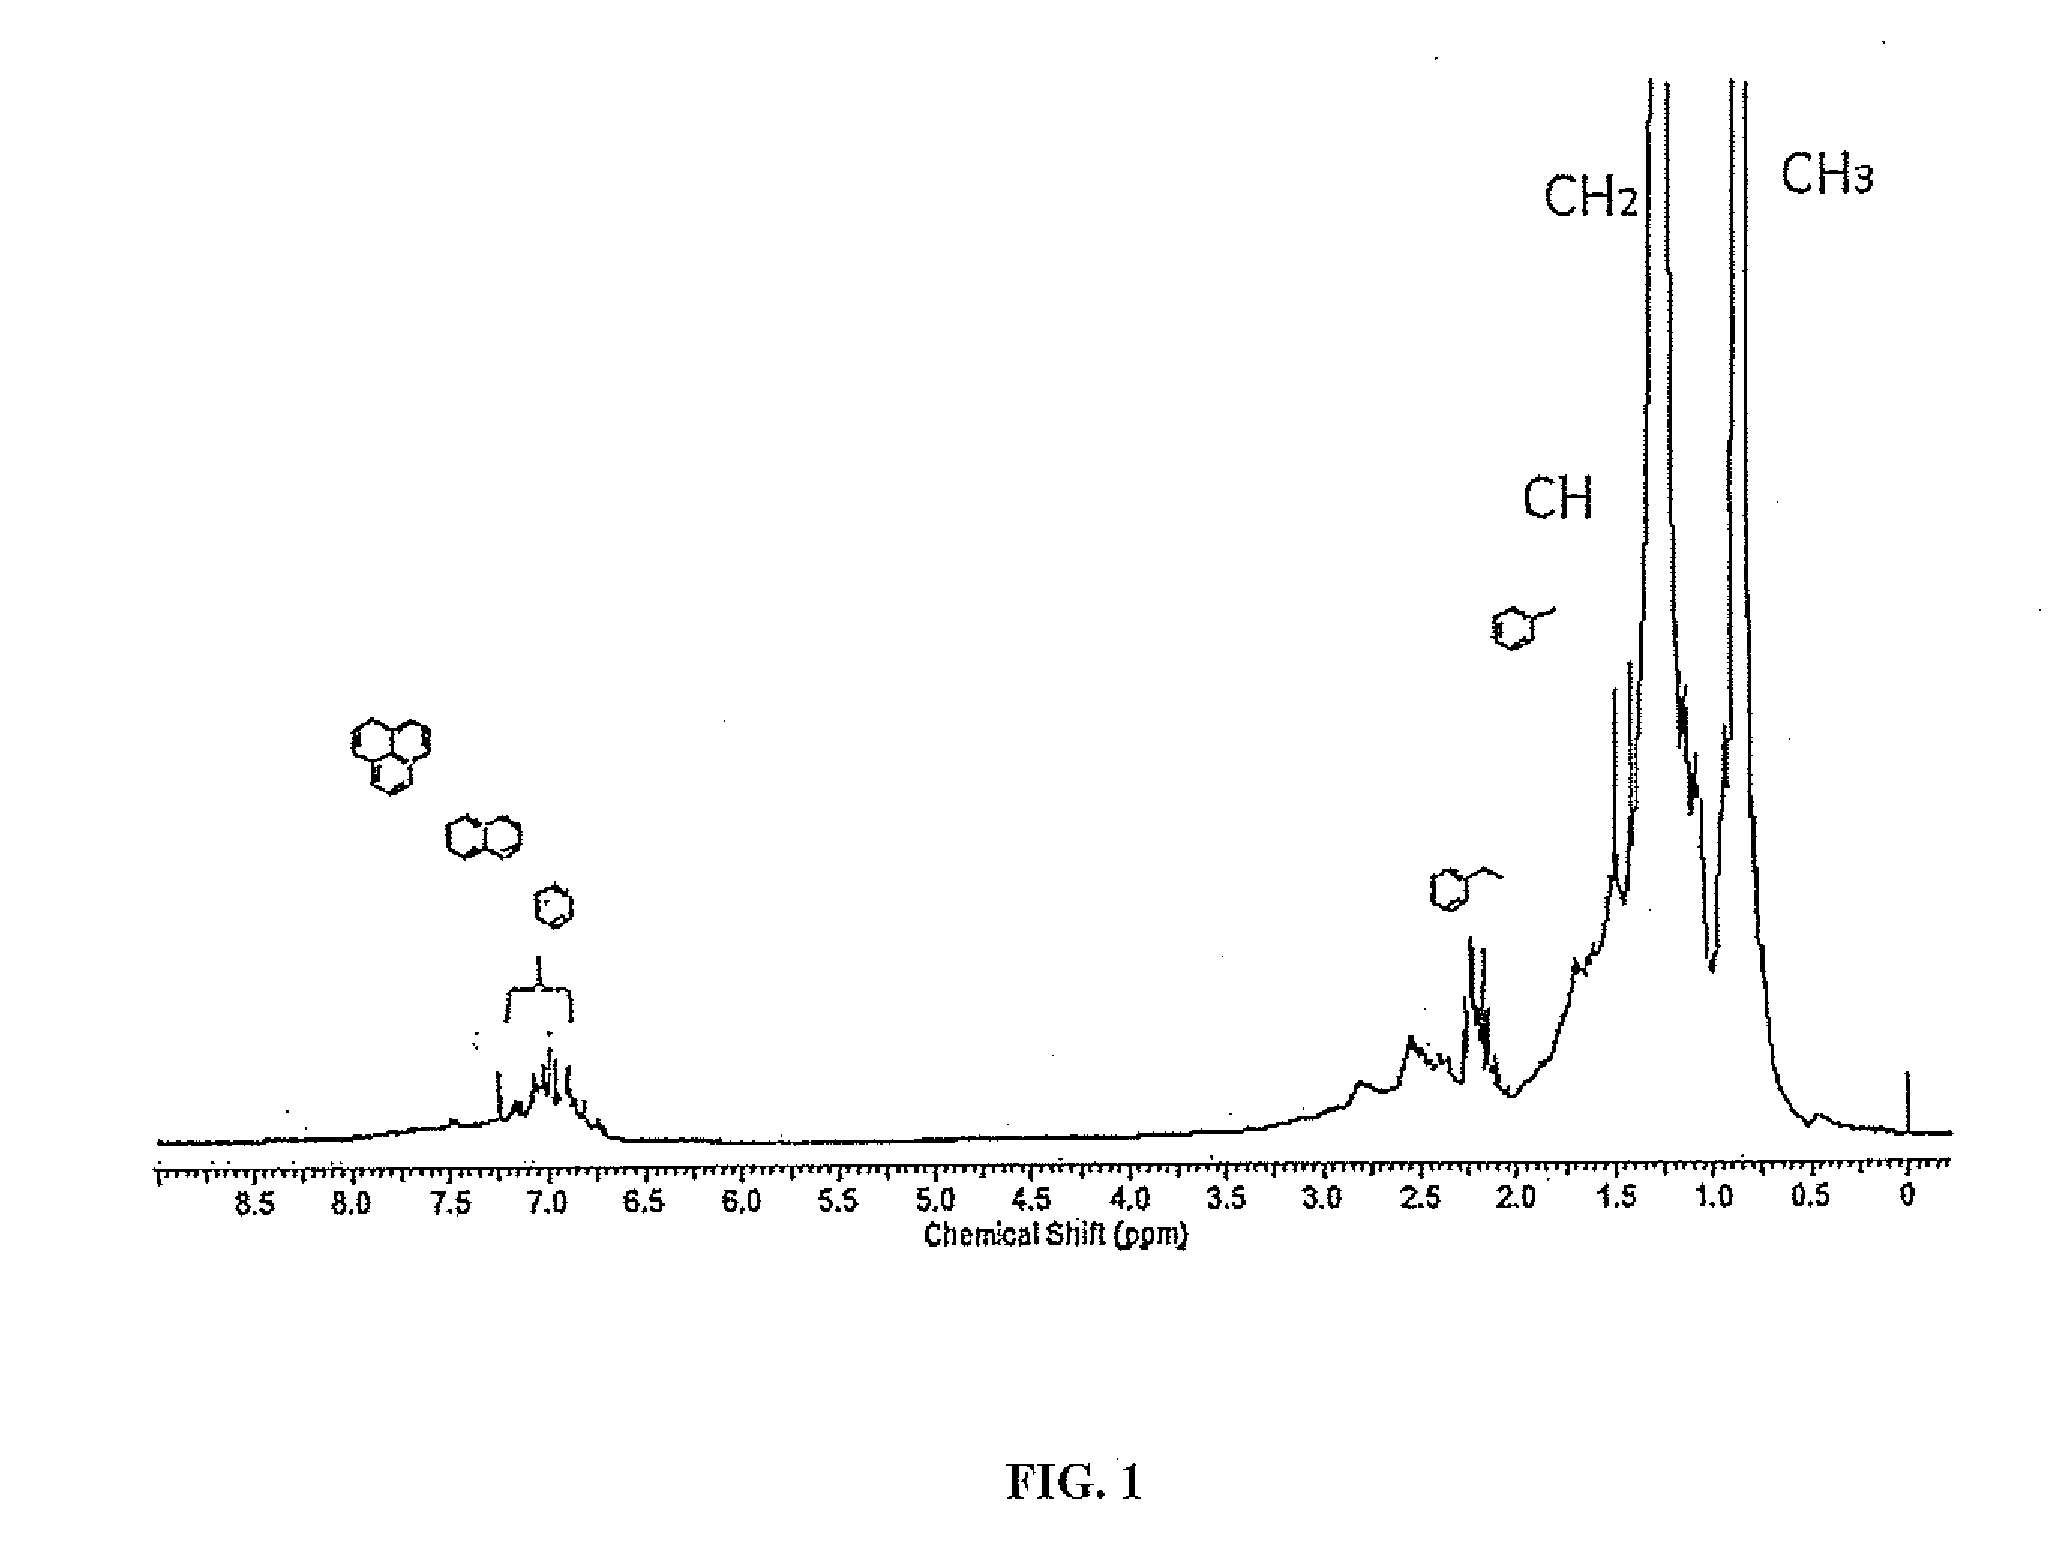 Characterization of crude oil by nmr spectroscopy